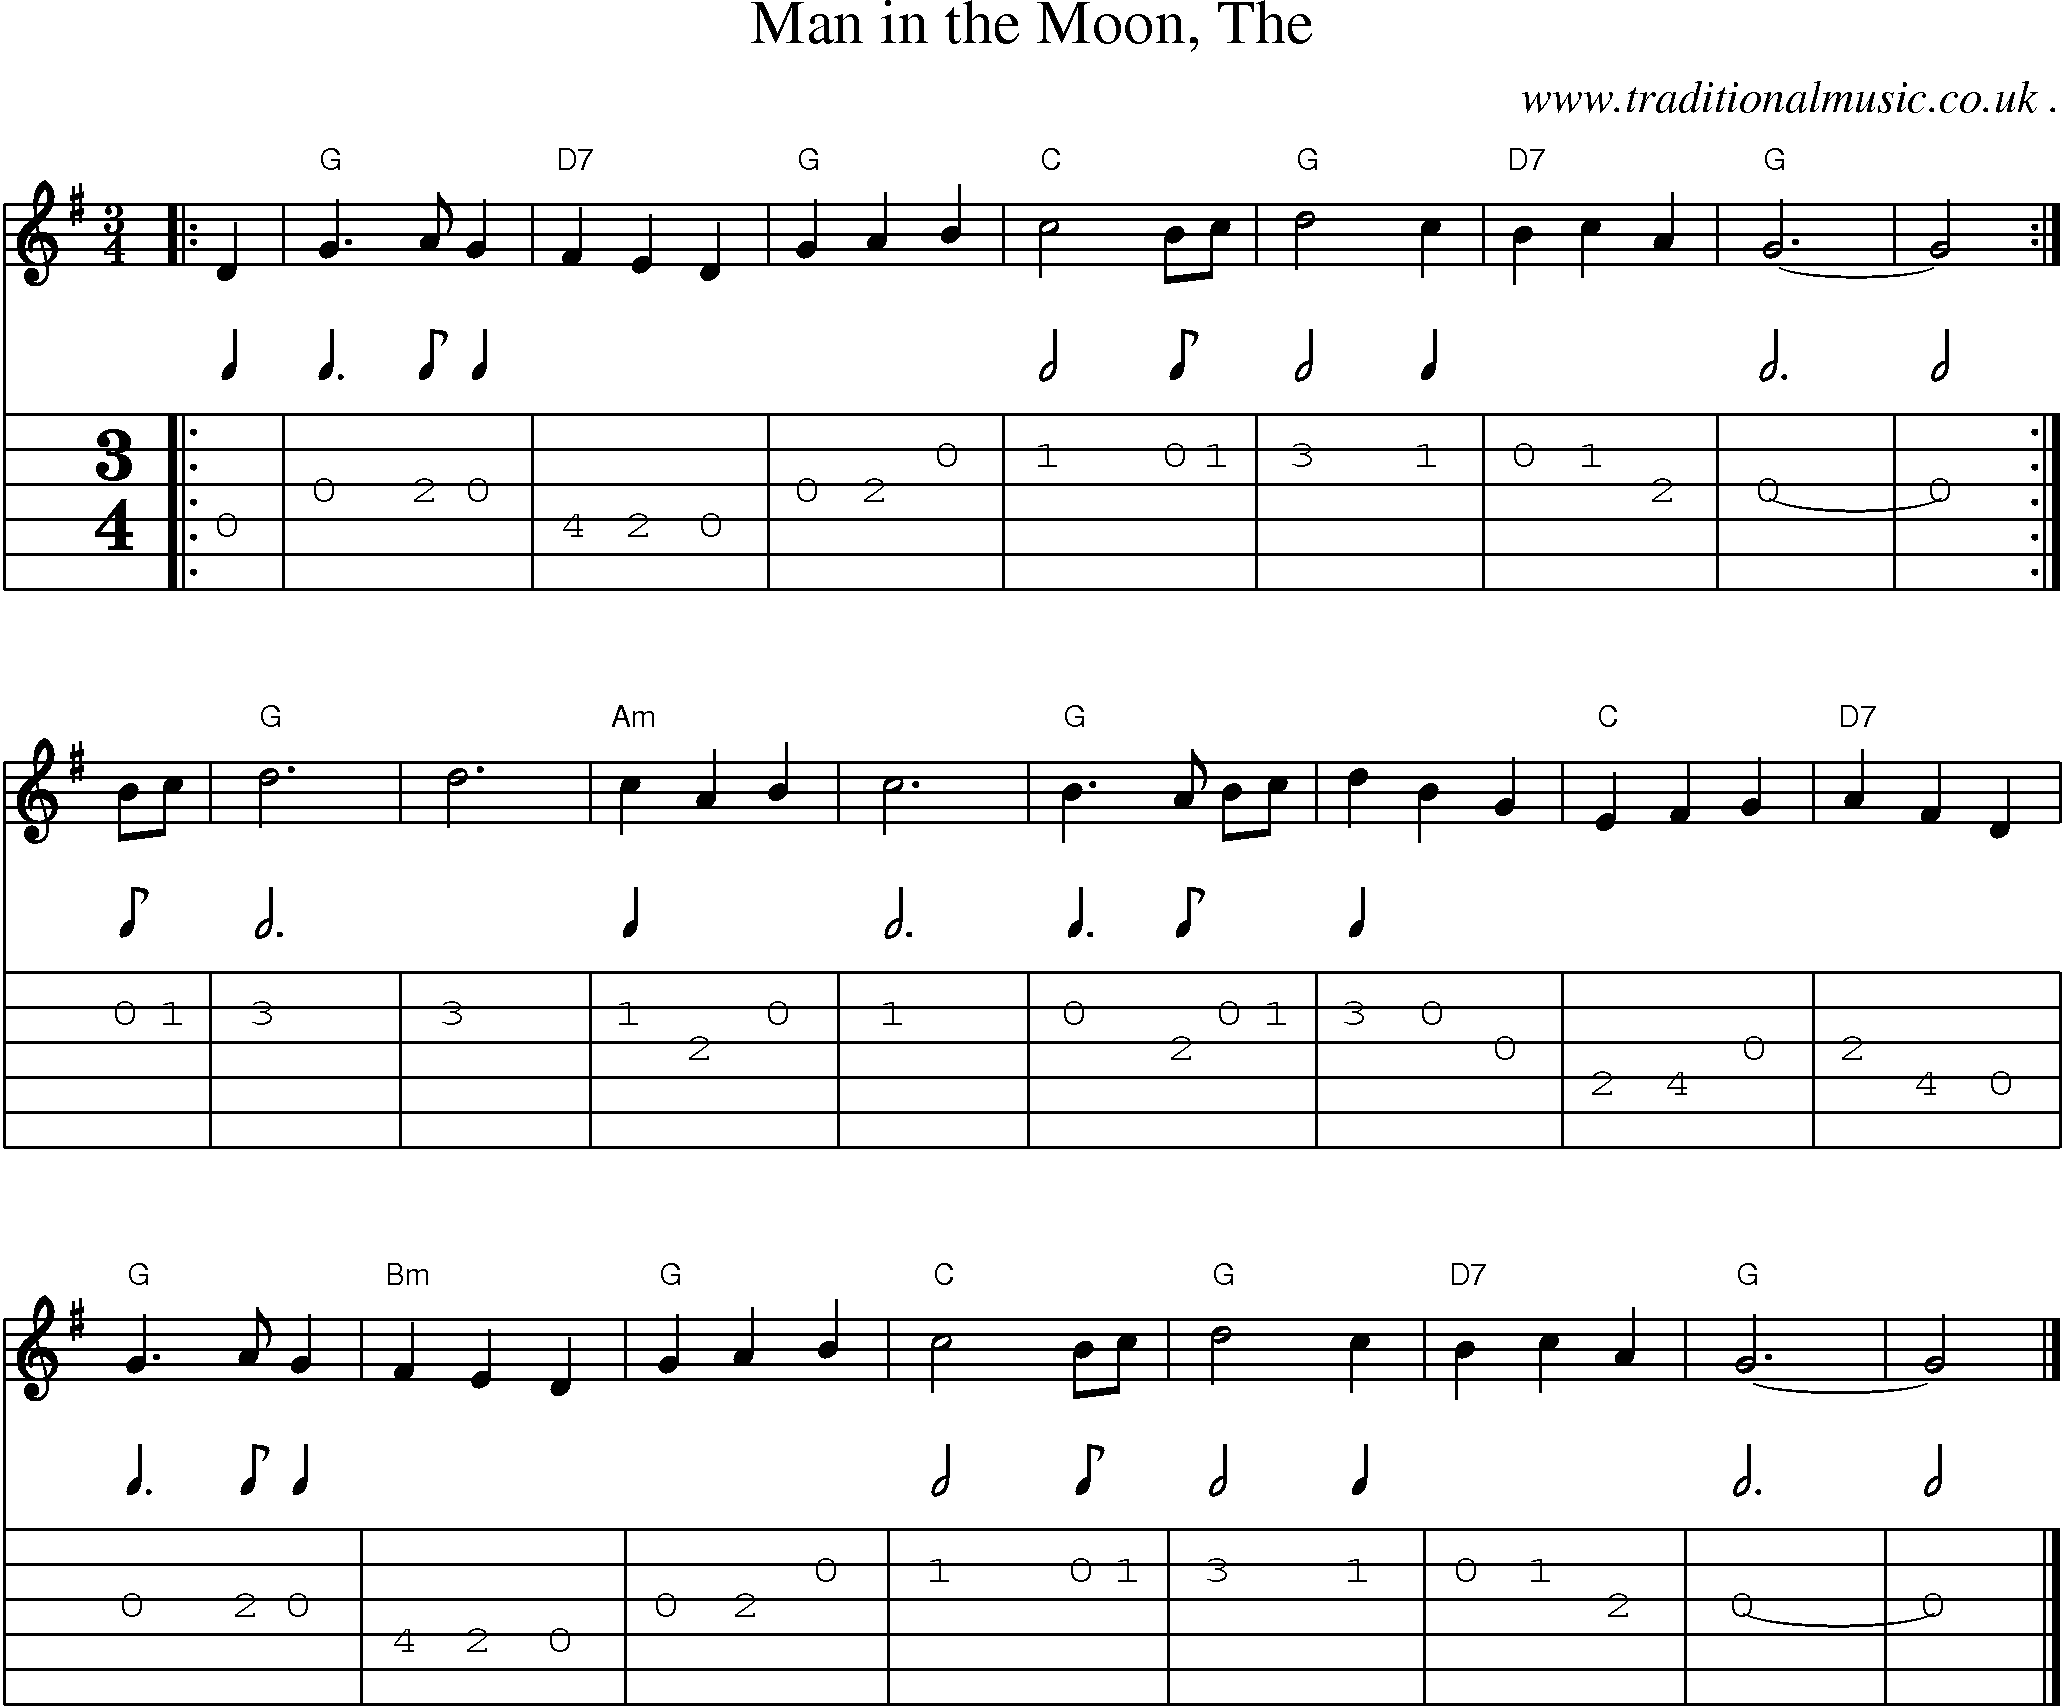 Music Score and Guitar Tabs for Man in the Moon The